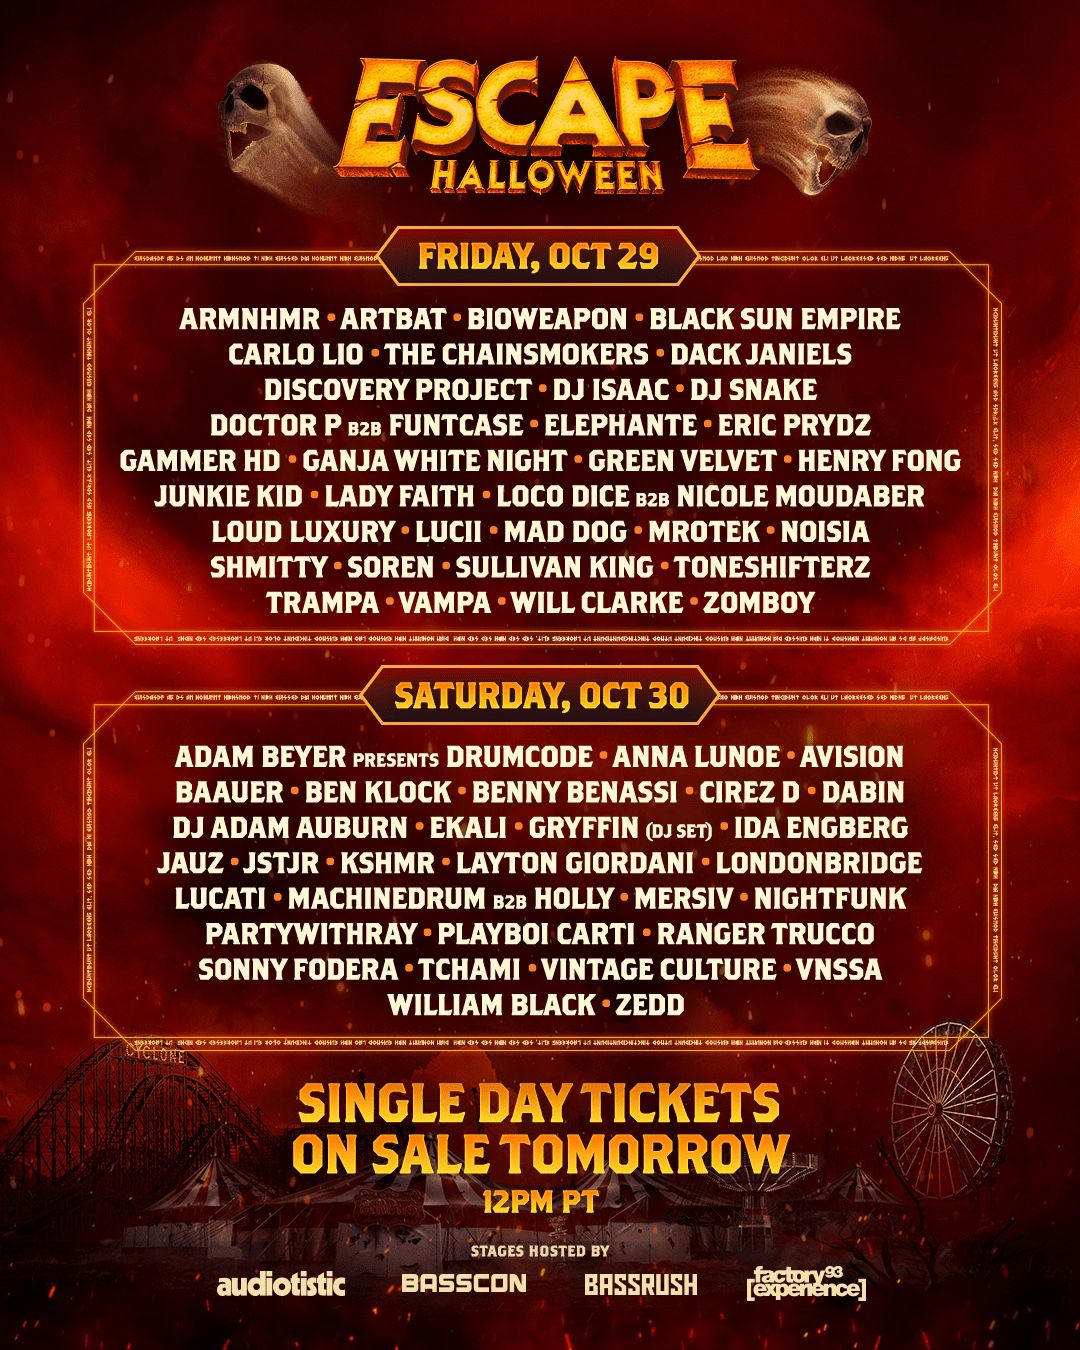 Escape Halloween 2 Tickets For Friday 